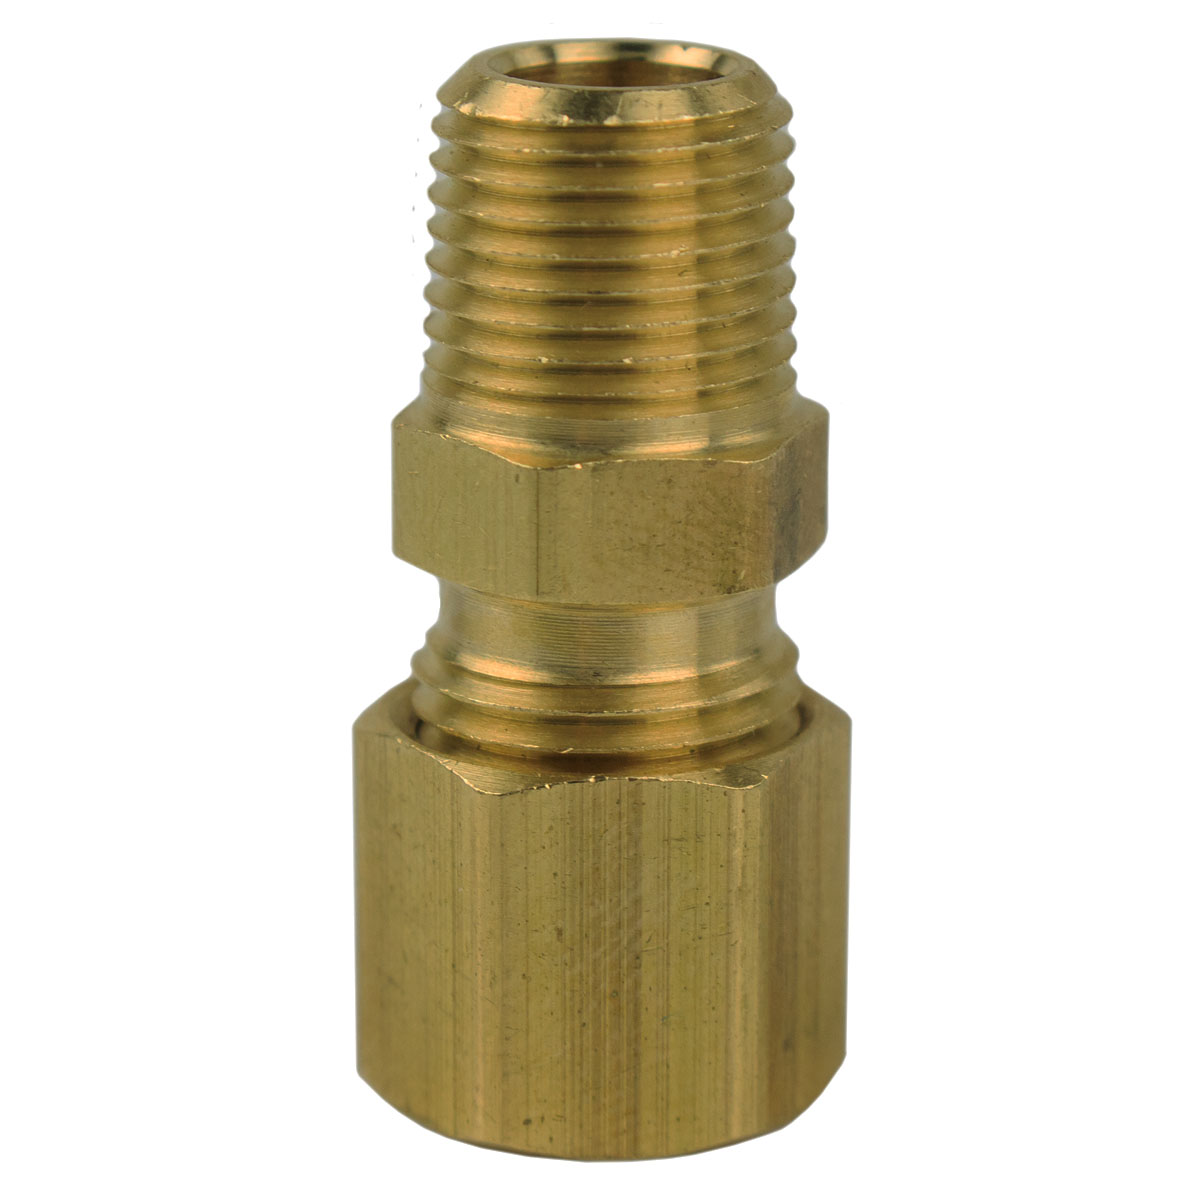 Compression 9/16" 14mm OD Tube to 1/2" NPT  Male Pipe Brass Fitting N-LDES